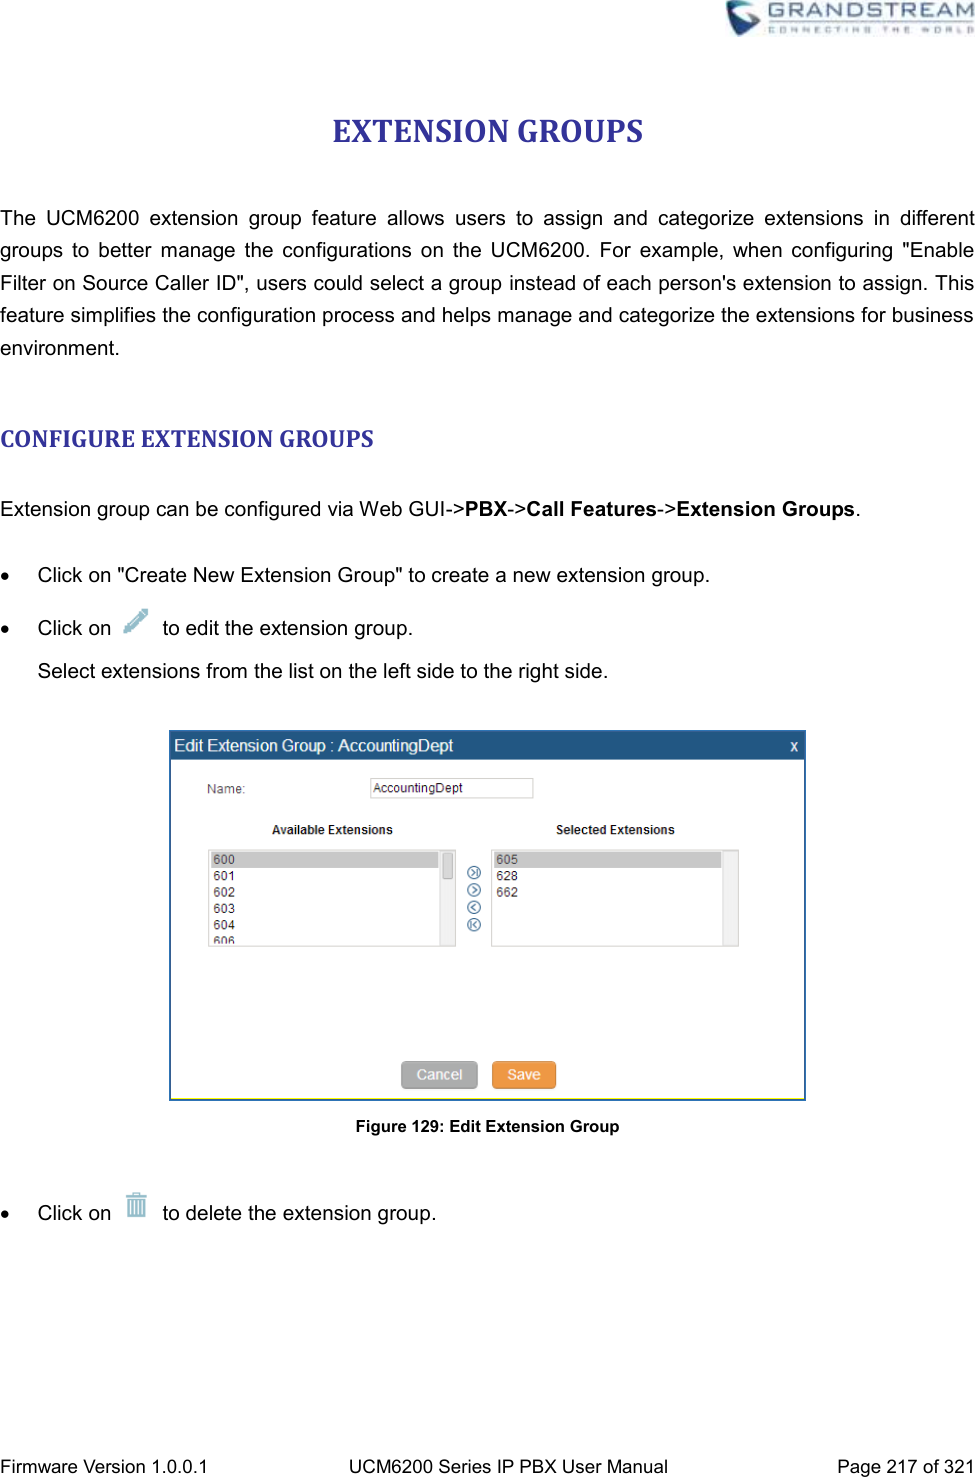  Firmware Version 1.0.0.1 UCM6200 Series IP PBX User Manual Page 217 of 321    EXTENSION GROUPS  The  UCM6200  extension  group  feature  allows  users  to  assign  and  categorize  extensions  in  different groups  to  better  manage  the  configurations  on  the  UCM6200.  For  example,  when  configuring  &quot;Enable Filter on Source Caller ID&quot;, users could select a group instead of each person&apos;s extension to assign. This feature simplifies the configuration process and helps manage and categorize the extensions for business environment.  CONFIGURE EXTENSION GROUPS  Extension group can be configured via Web GUI-&gt;PBX-&gt;Call Features-&gt;Extension Groups.    Click on &quot;Create New Extension Group&quot; to create a new extension group.   Click on    to edit the extension group. Select extensions from the list on the left side to the right side.   Figure 129: Edit Extension Group    Click on    to delete the extension group.    